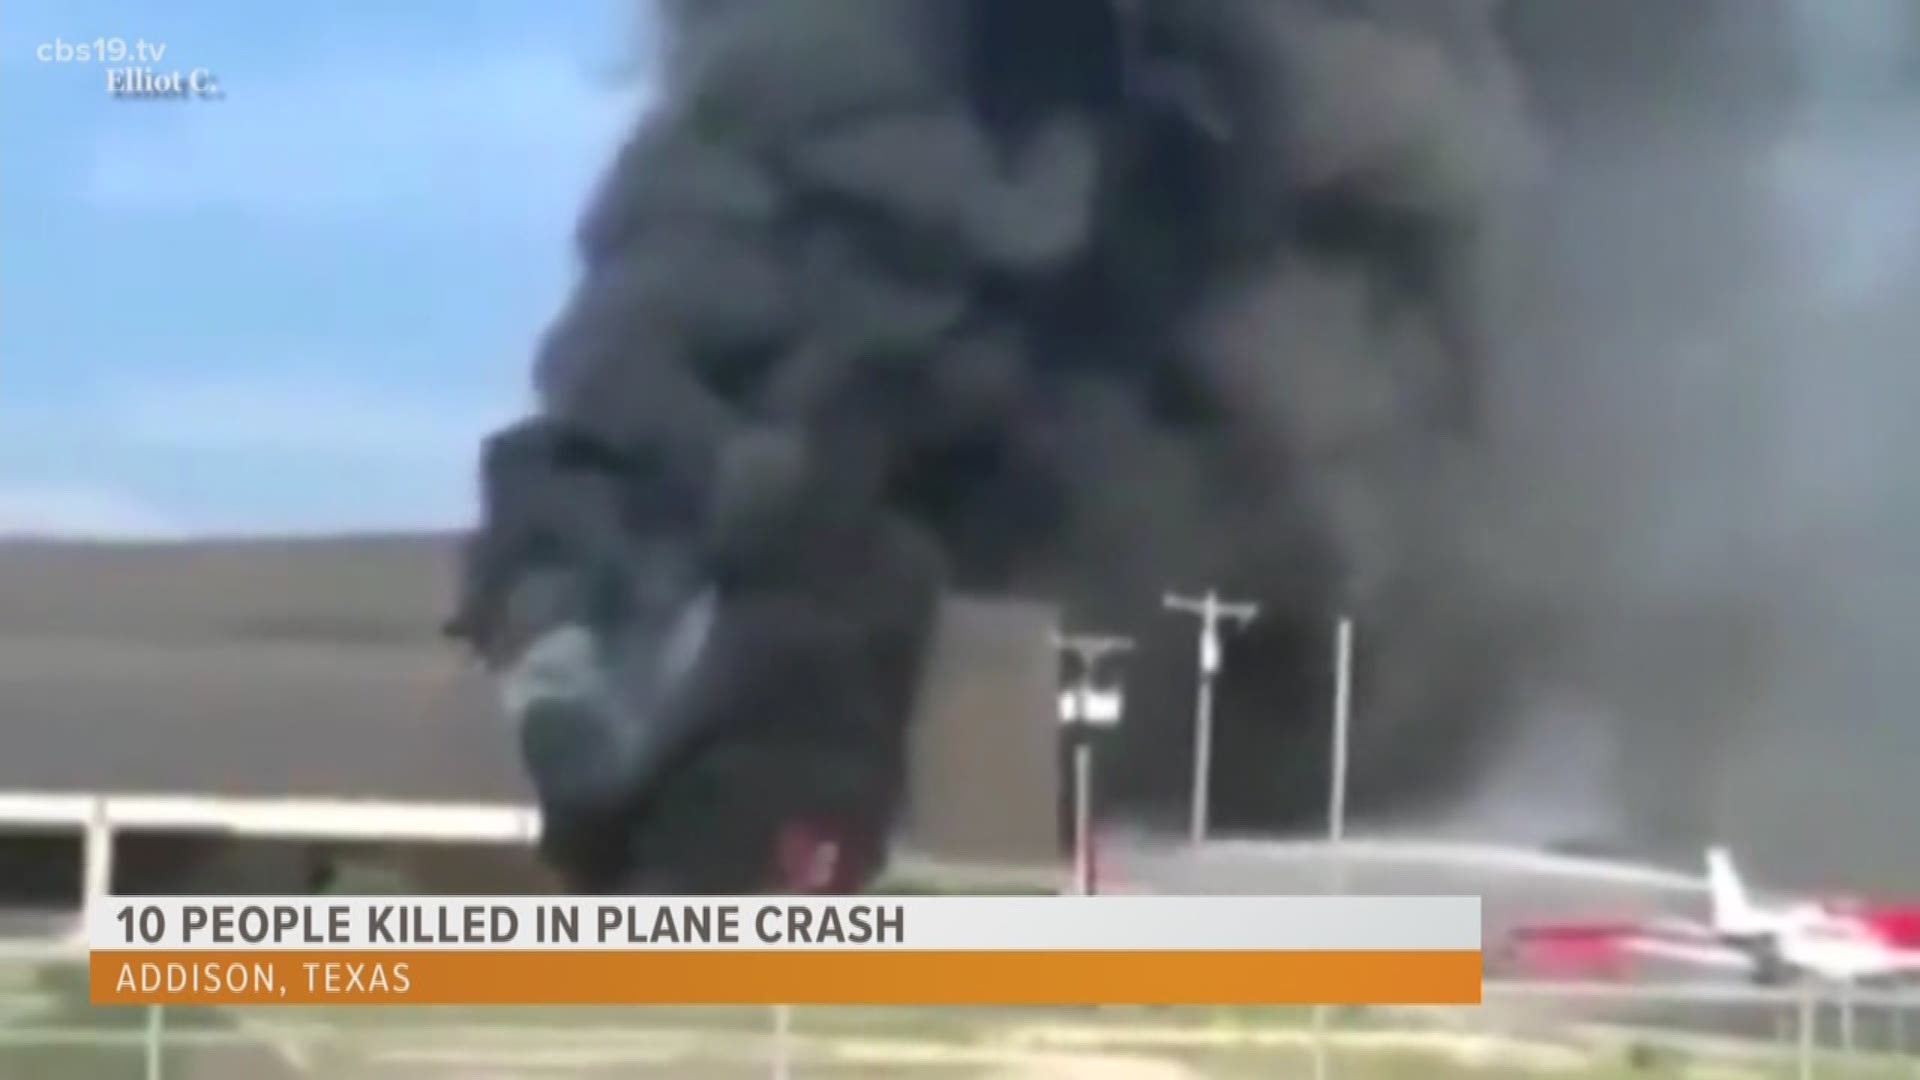 The NTSB is currently investigating what happened after a plane crash left ten people dead on Sunday morning. It happened at the Addison Municipal Airport outside of Dallas.